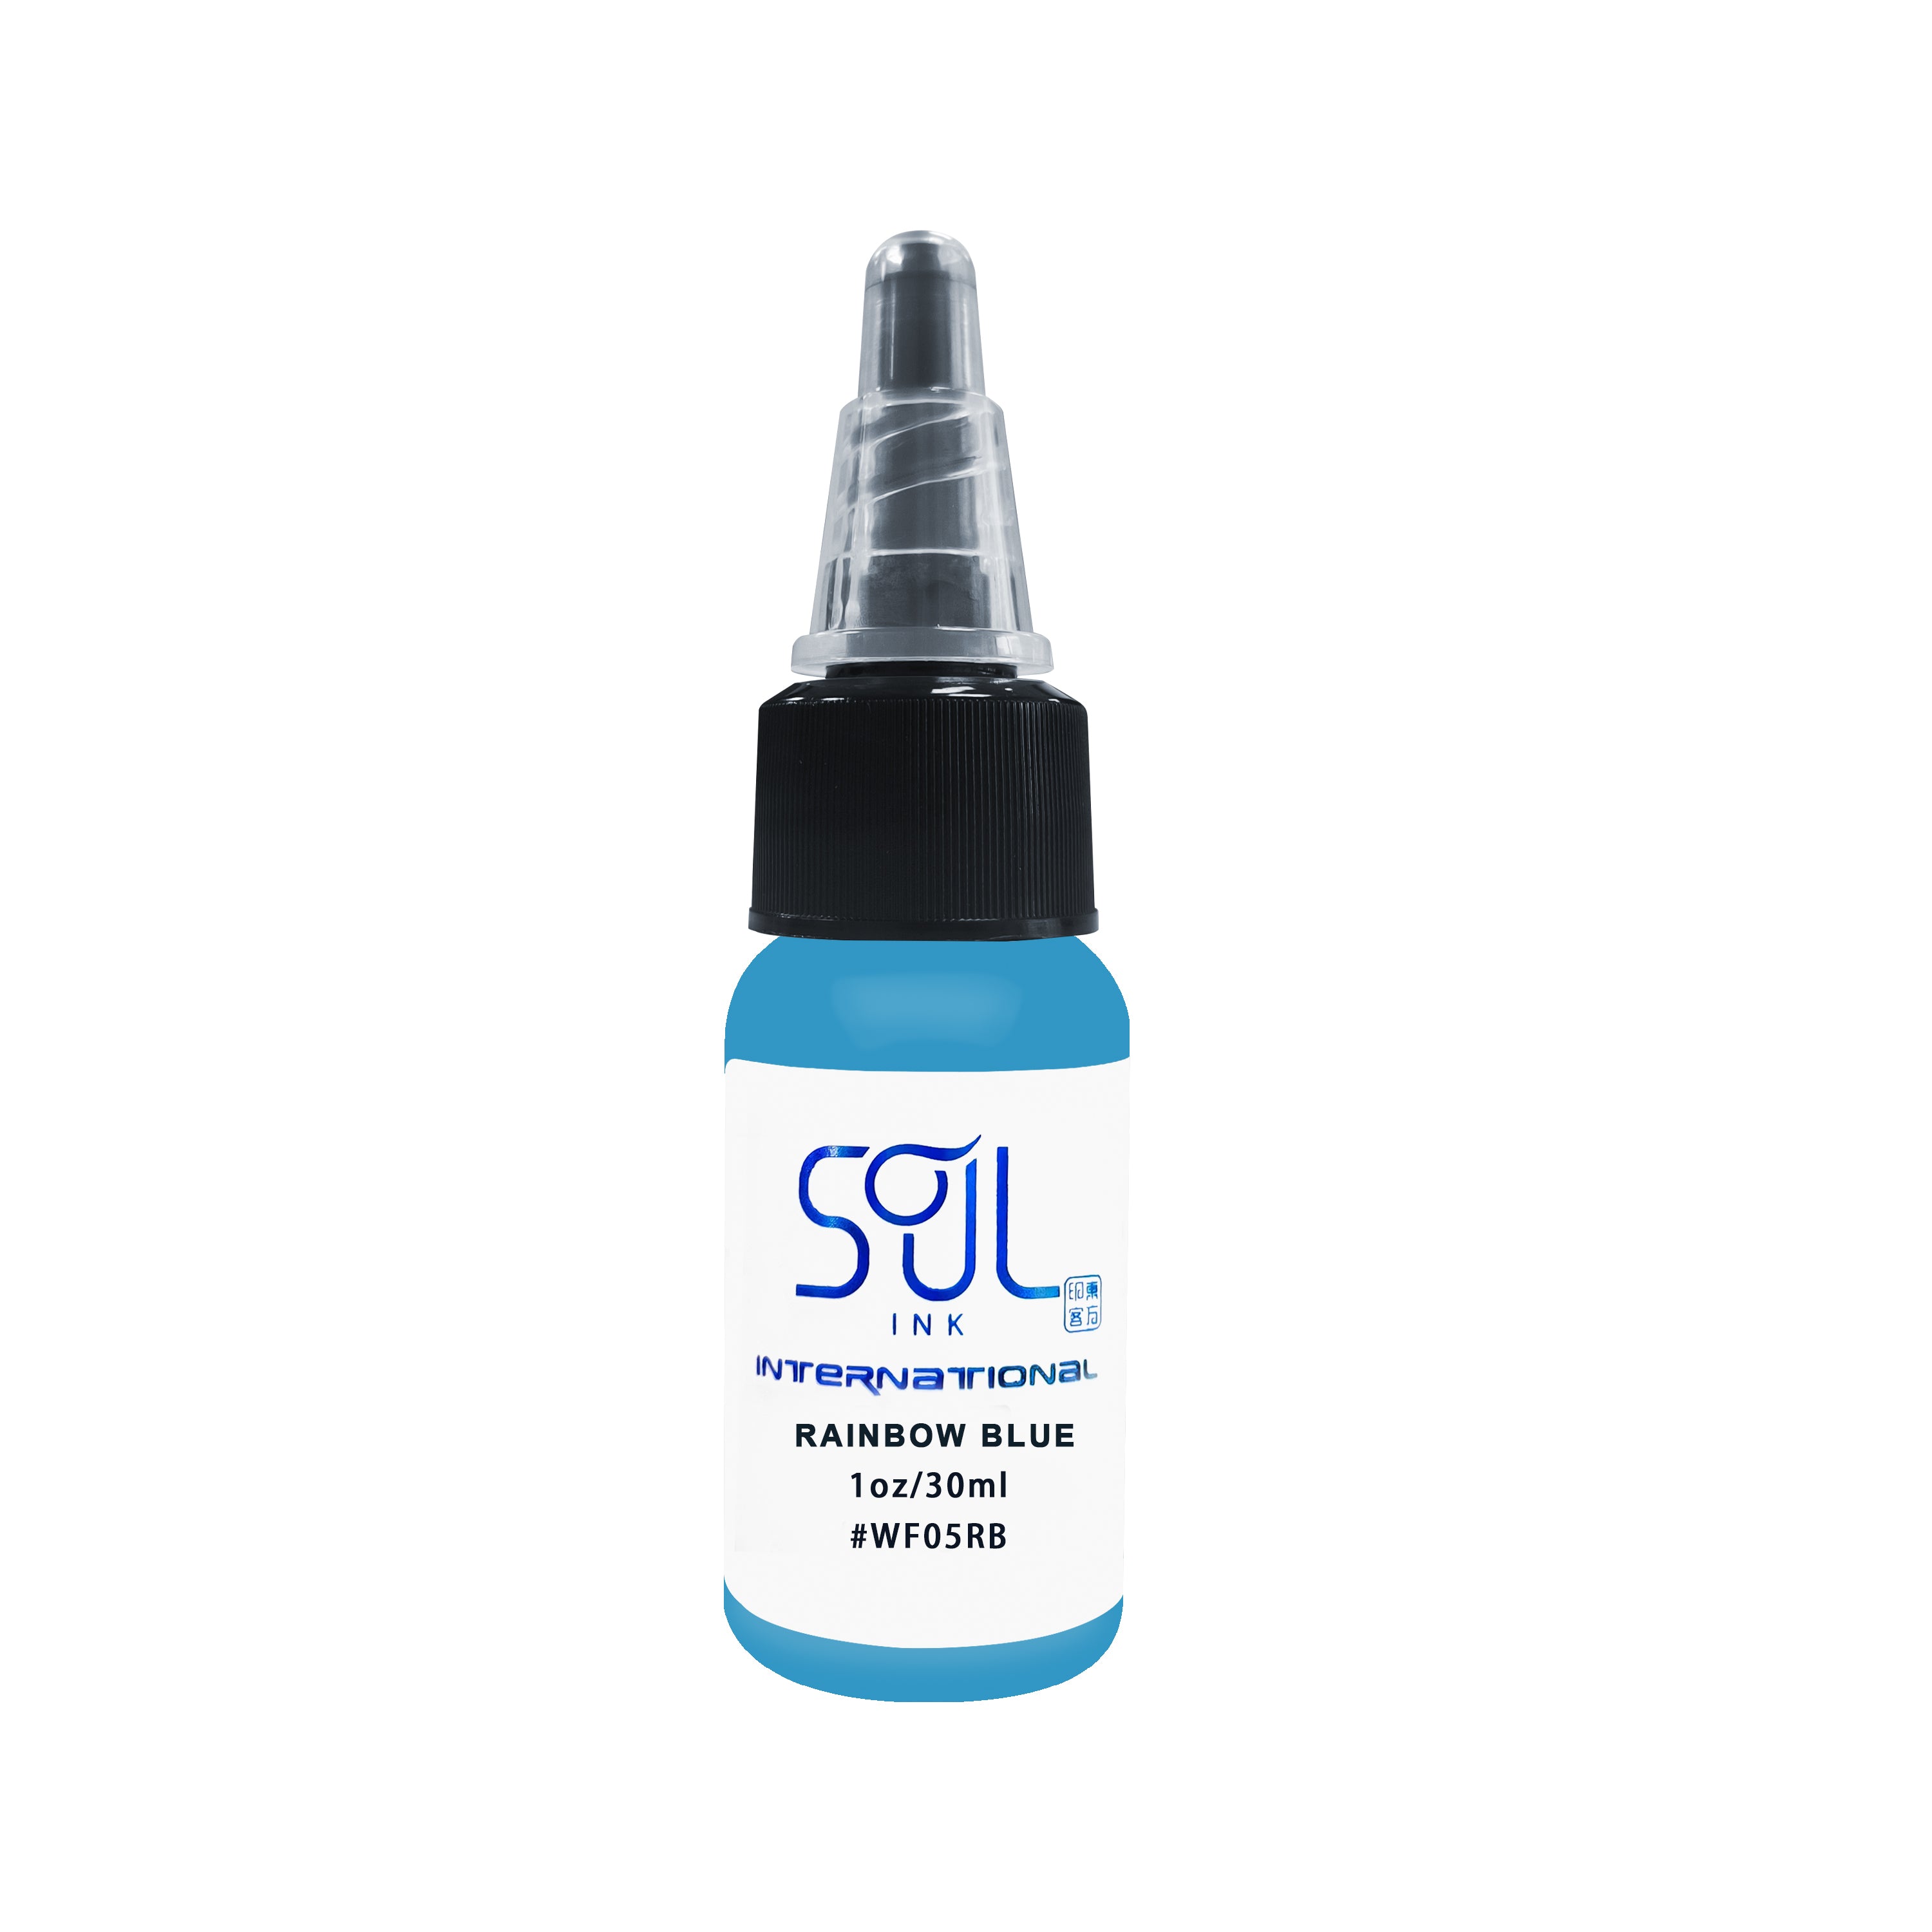 Photograph of a bottle of 'Soul Ink' brand rainbow blue ink. The label prominently displays the brand name 'Soul Ink' in stylish blue typography against a white background. The rainbow blue 30 ml bottle with a white label featuring the brands name 'Soul Ink'.